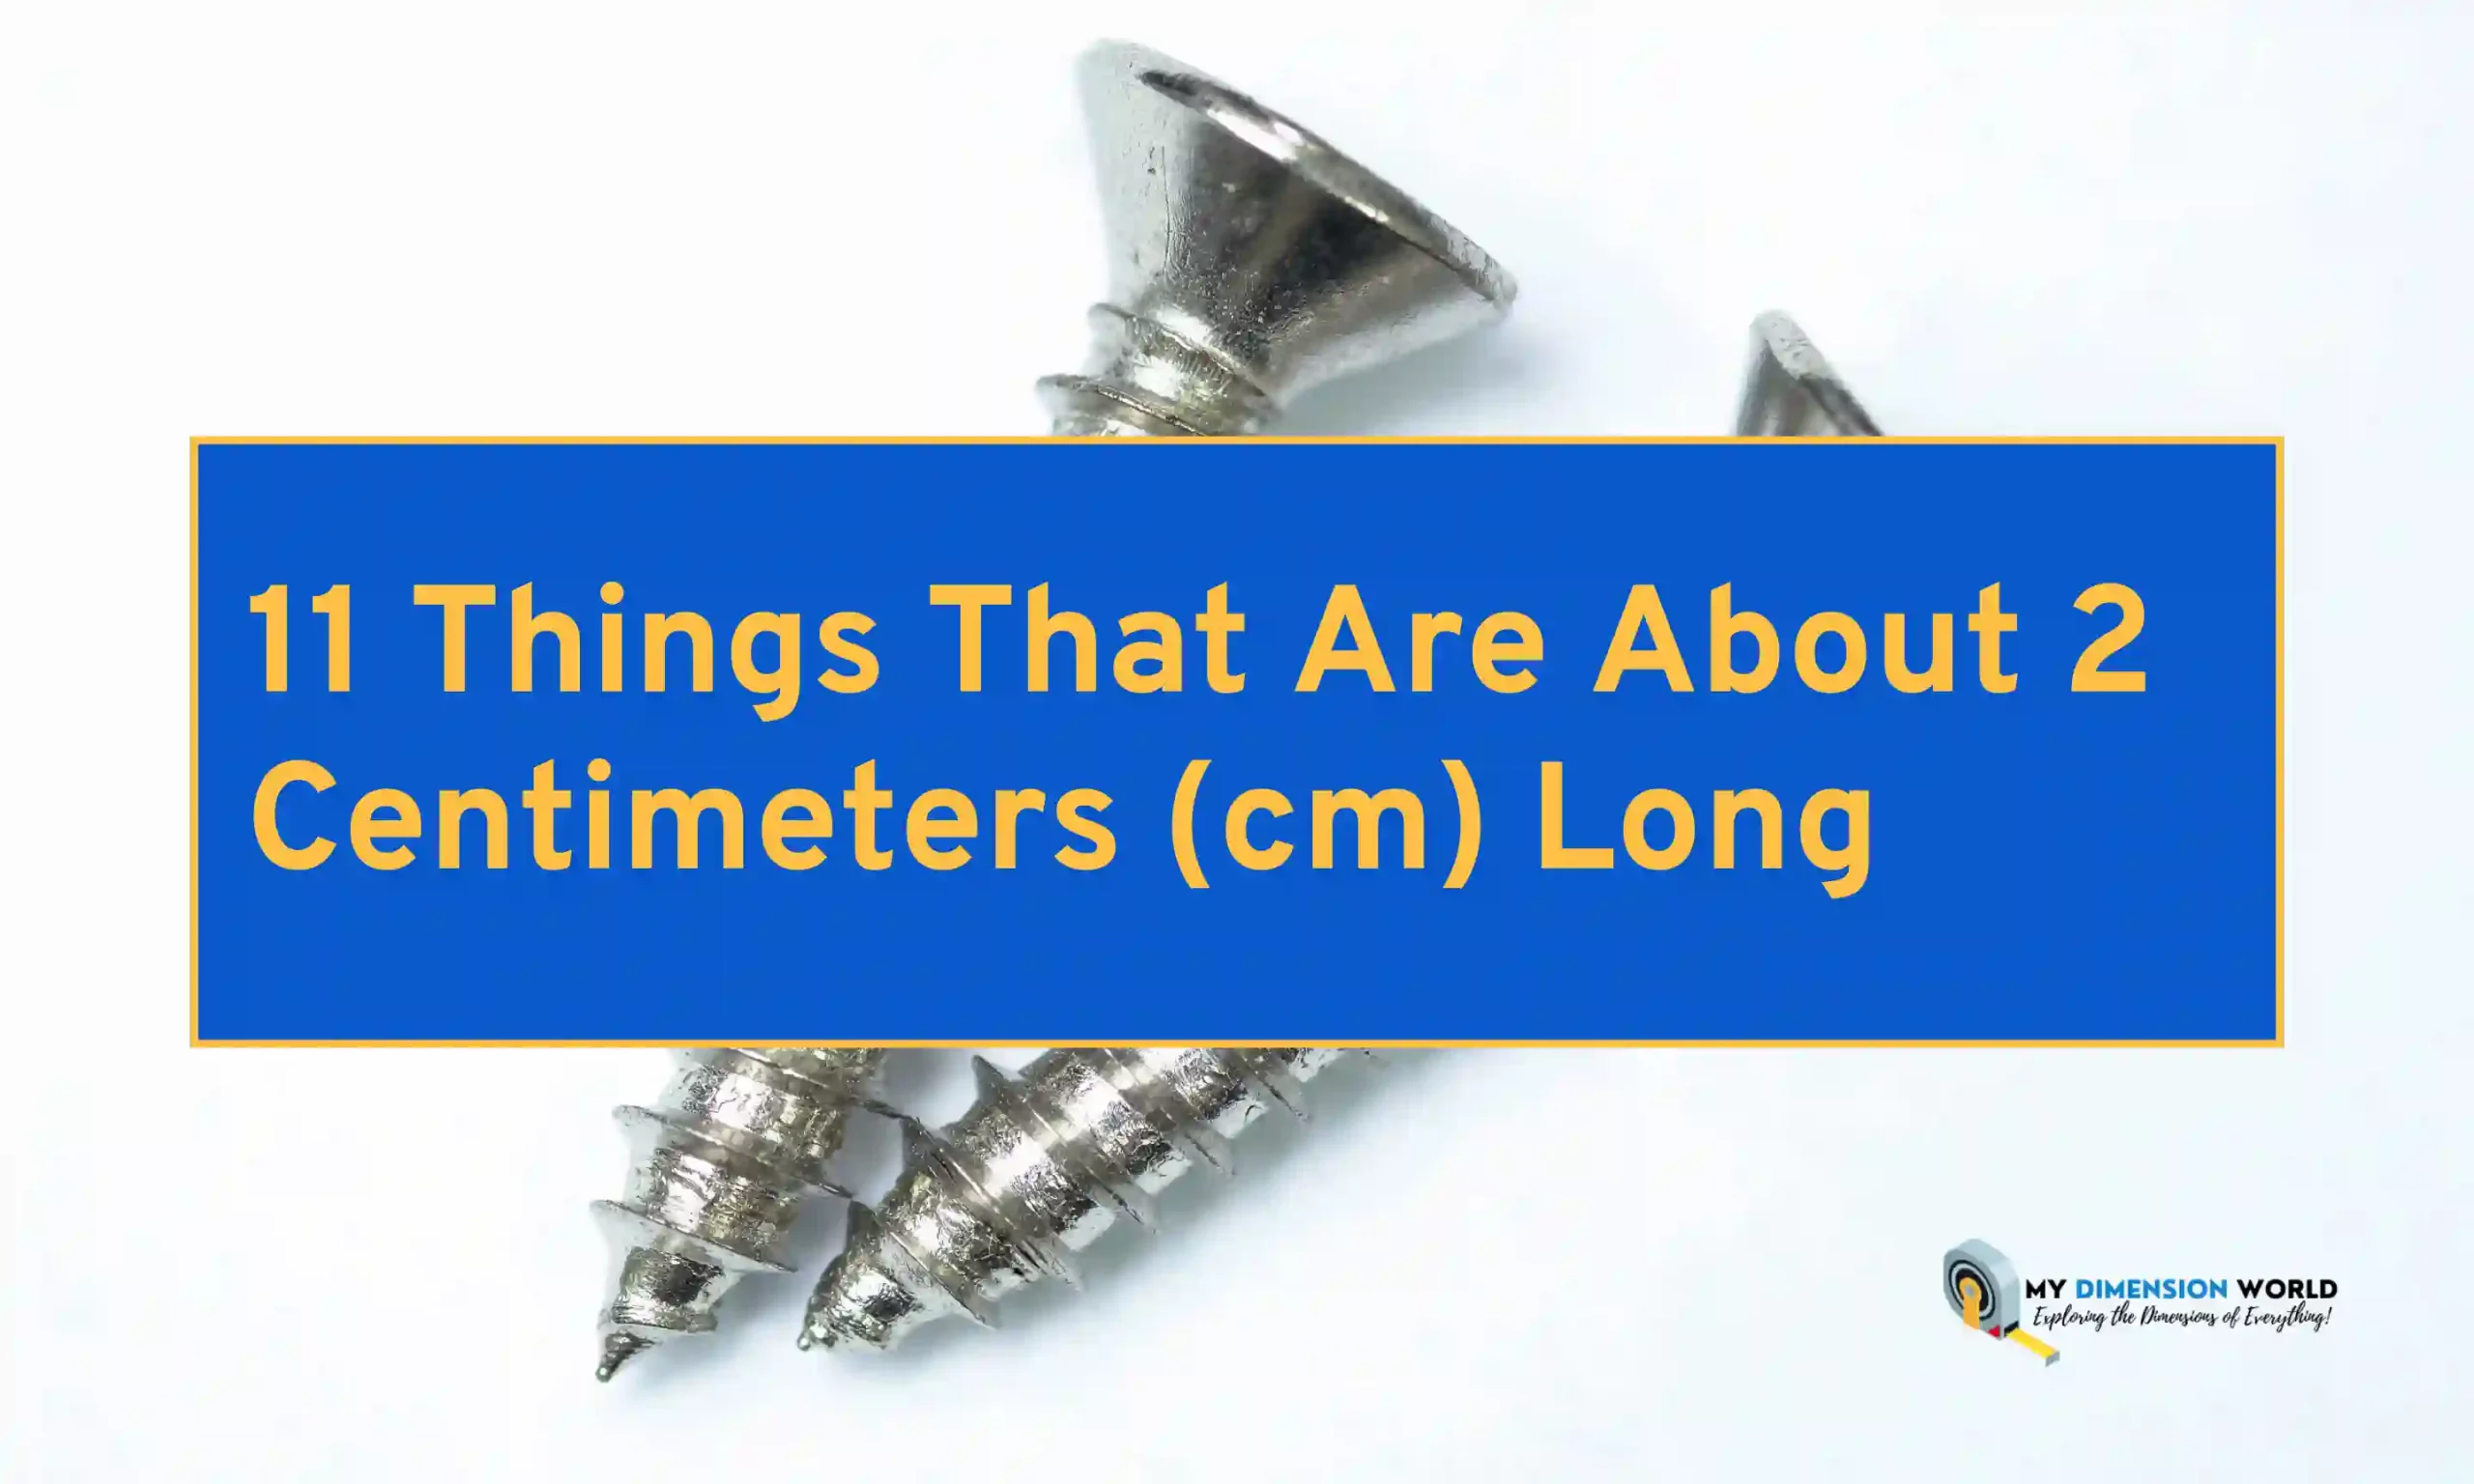 11 Things That Are About 2 Centimeters (cm) Long